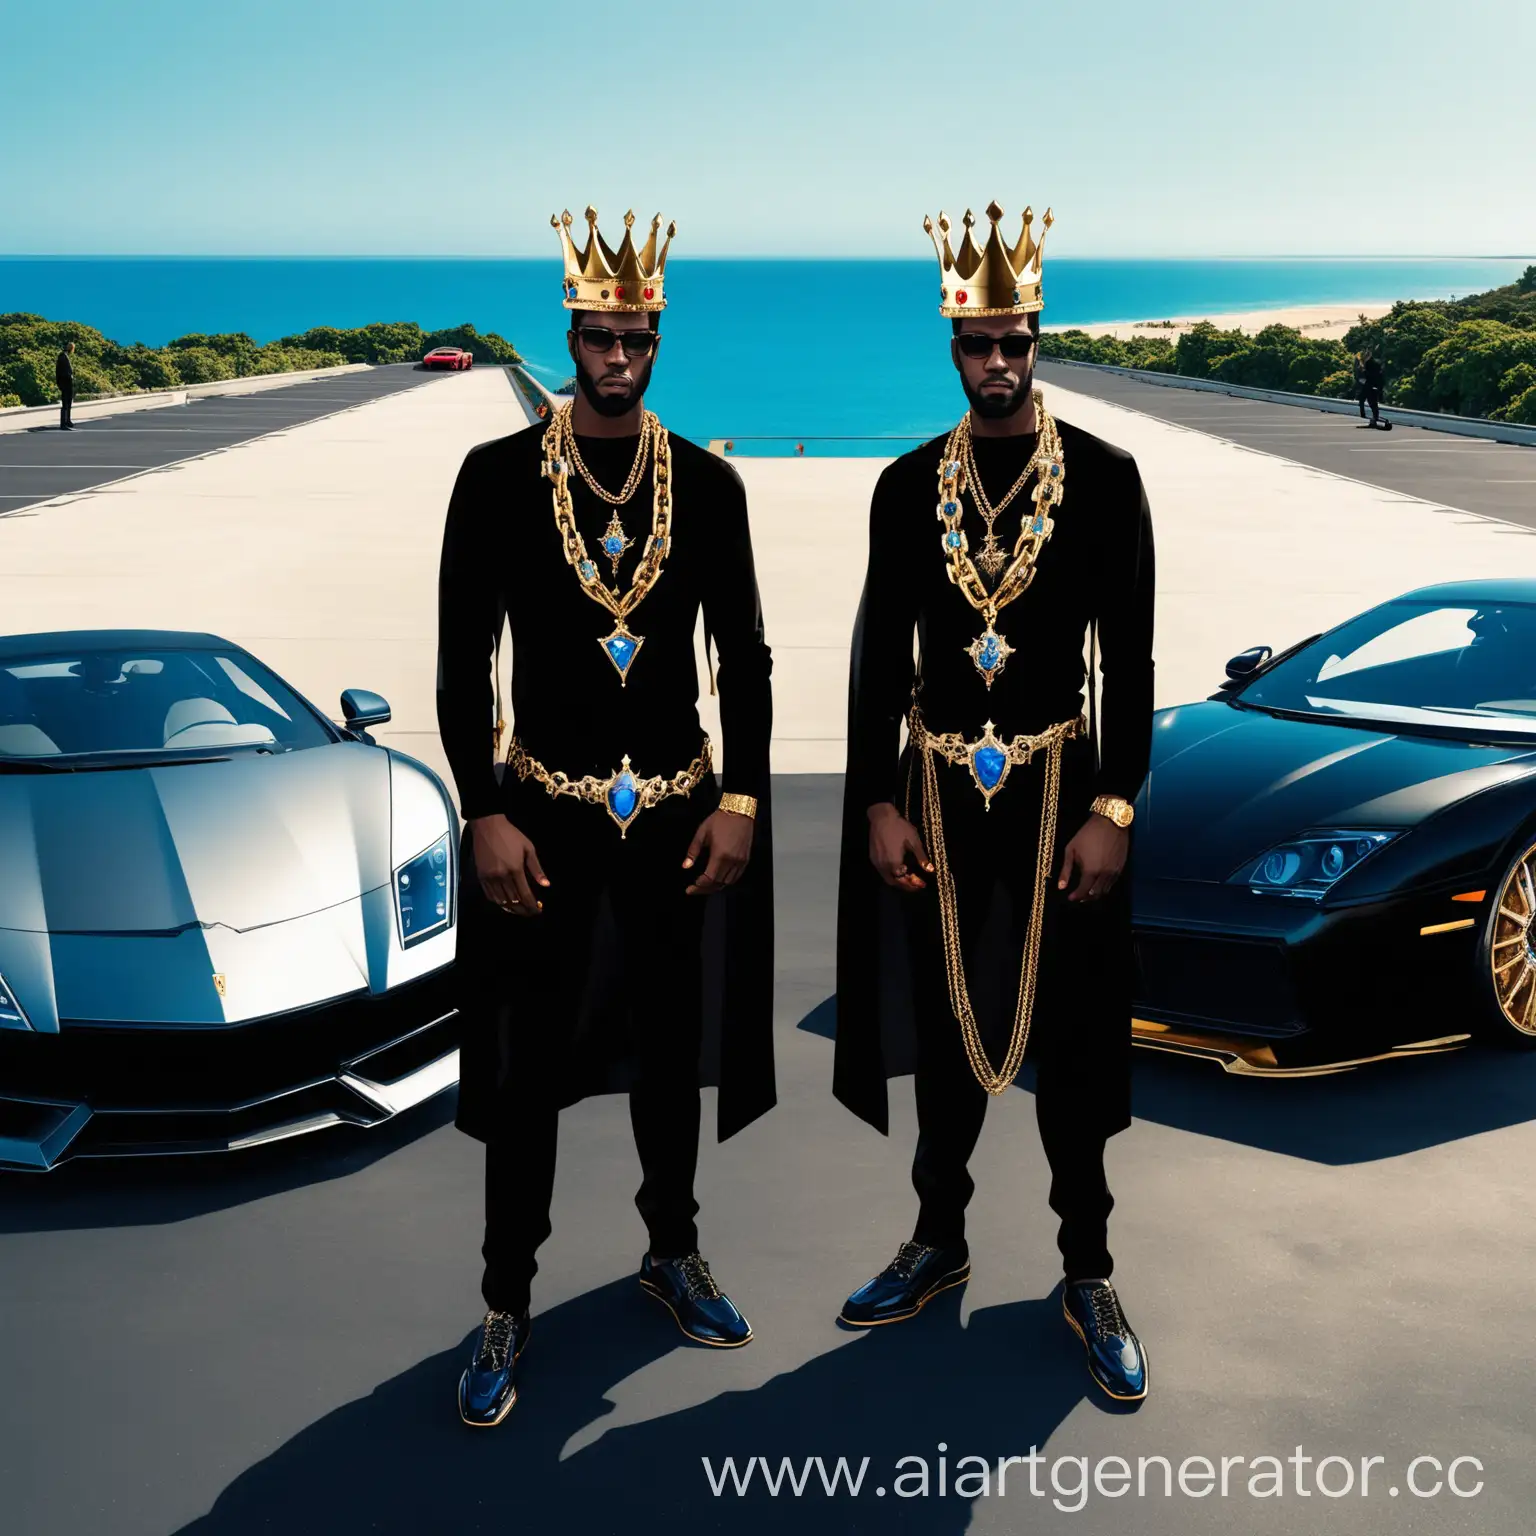 To tall men standing next to each other in black on black wearing gold crown with blue gems on it and the other one wearing a gold crown with red gems on it. Both with big gold neck chains with two luxury cars in the background in a parking lot slighty overlooking a clear blue beach down below over the edge of the parking lot behind them.